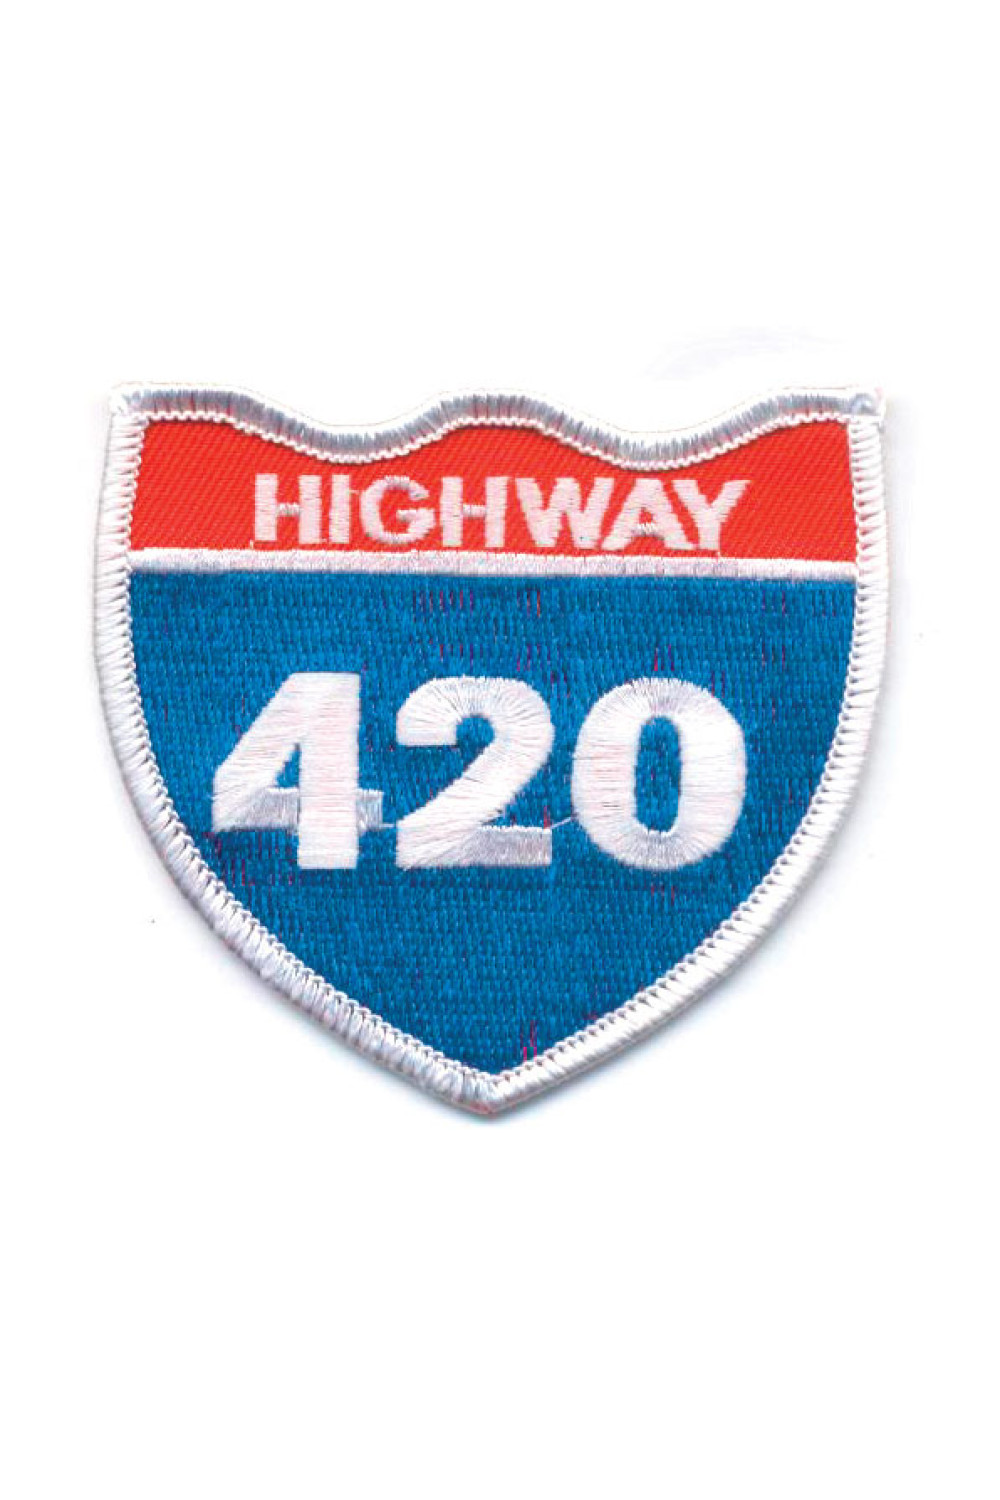 Highway 420 Sign Patch 3"